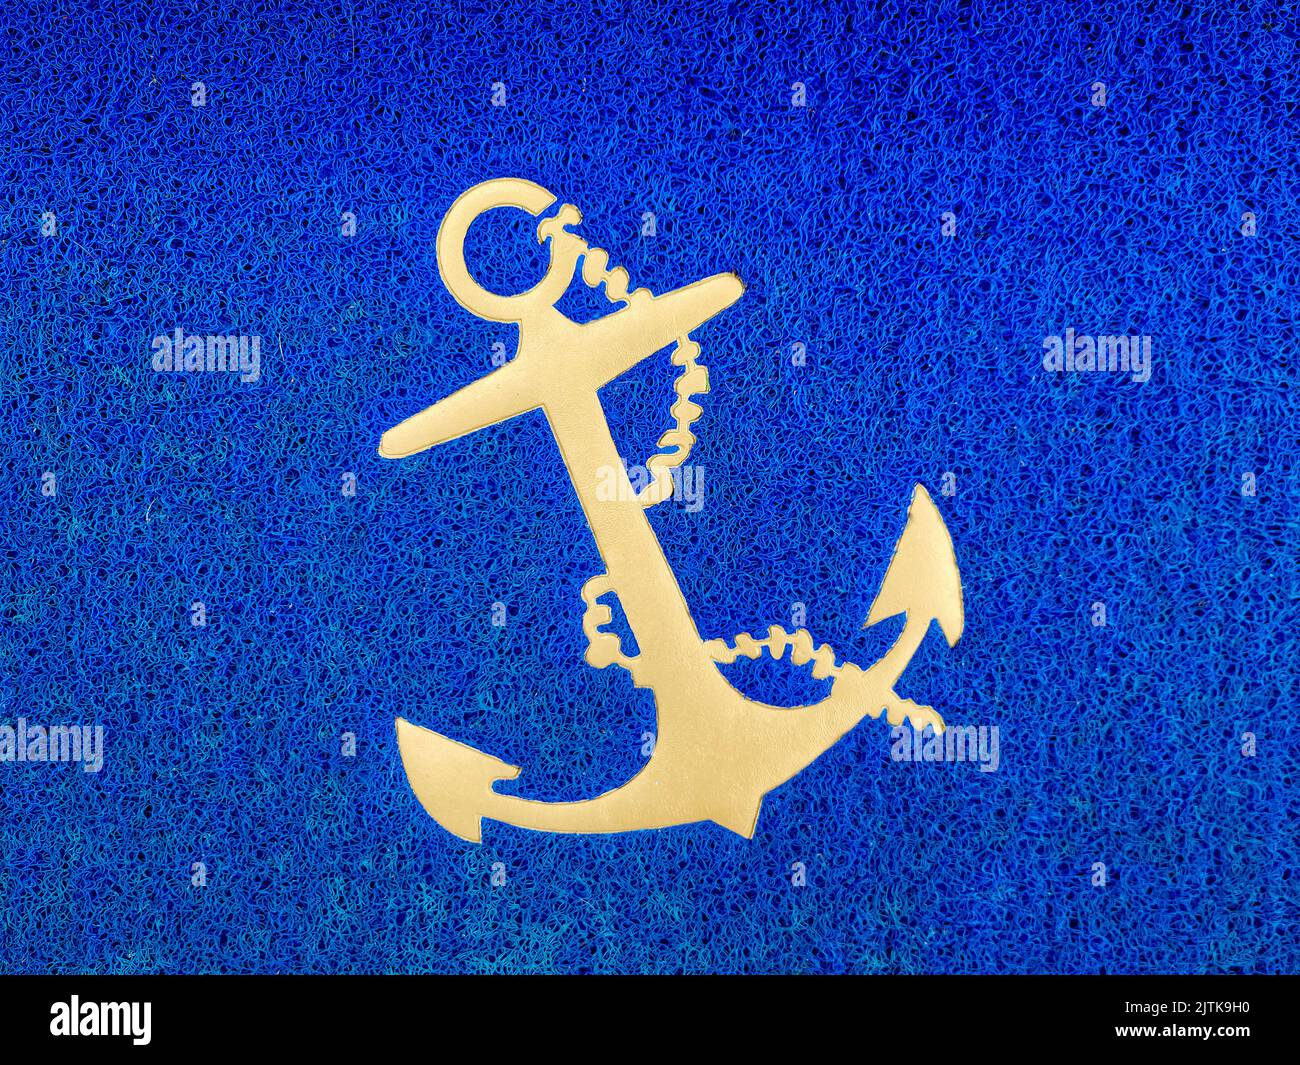 Gold boat anchor on bold blue textured background Stock Photo